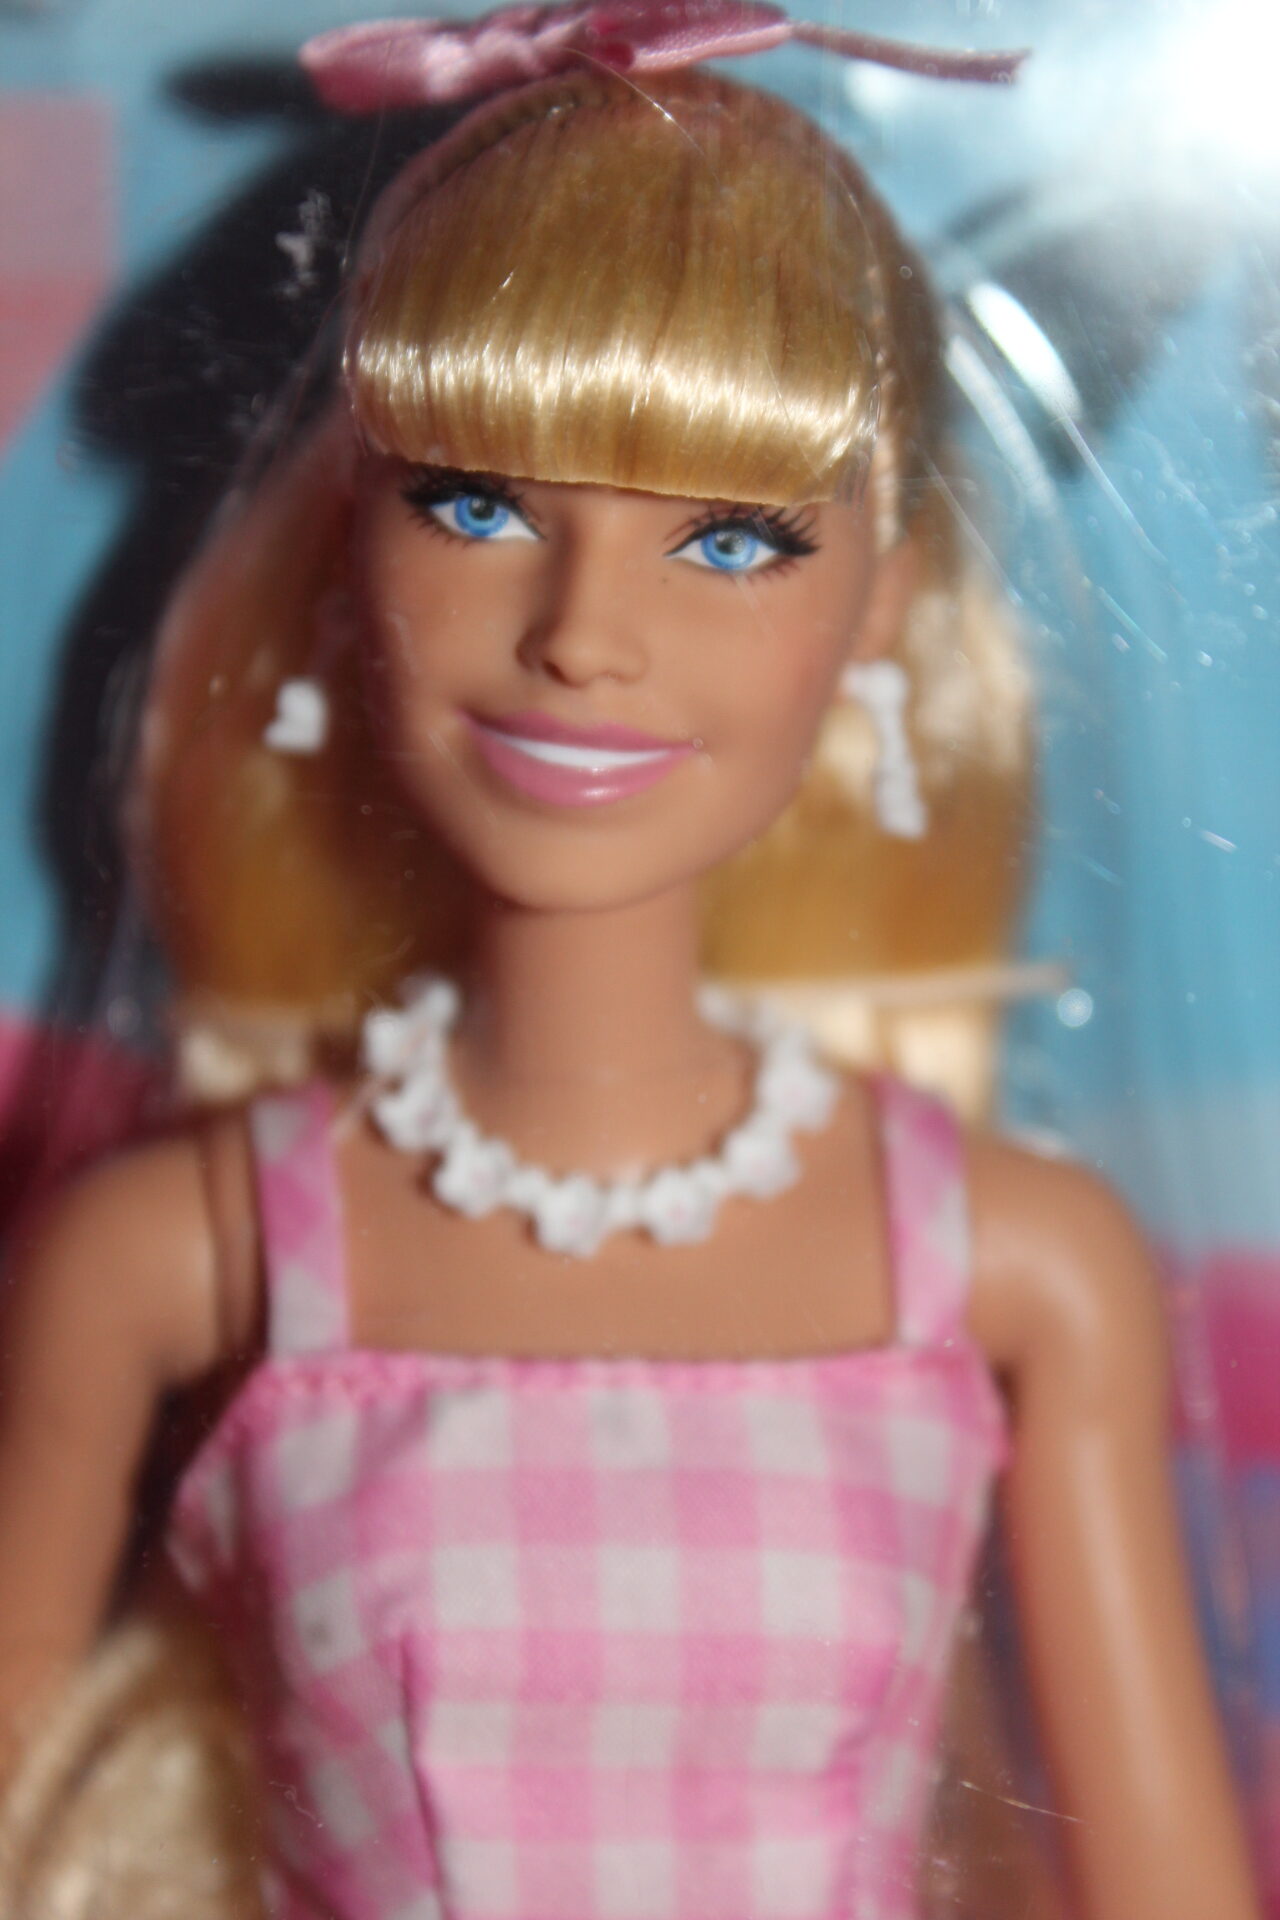 Barbie Collector “Barbie THE MOVIE ” Greetings from the Barbieland